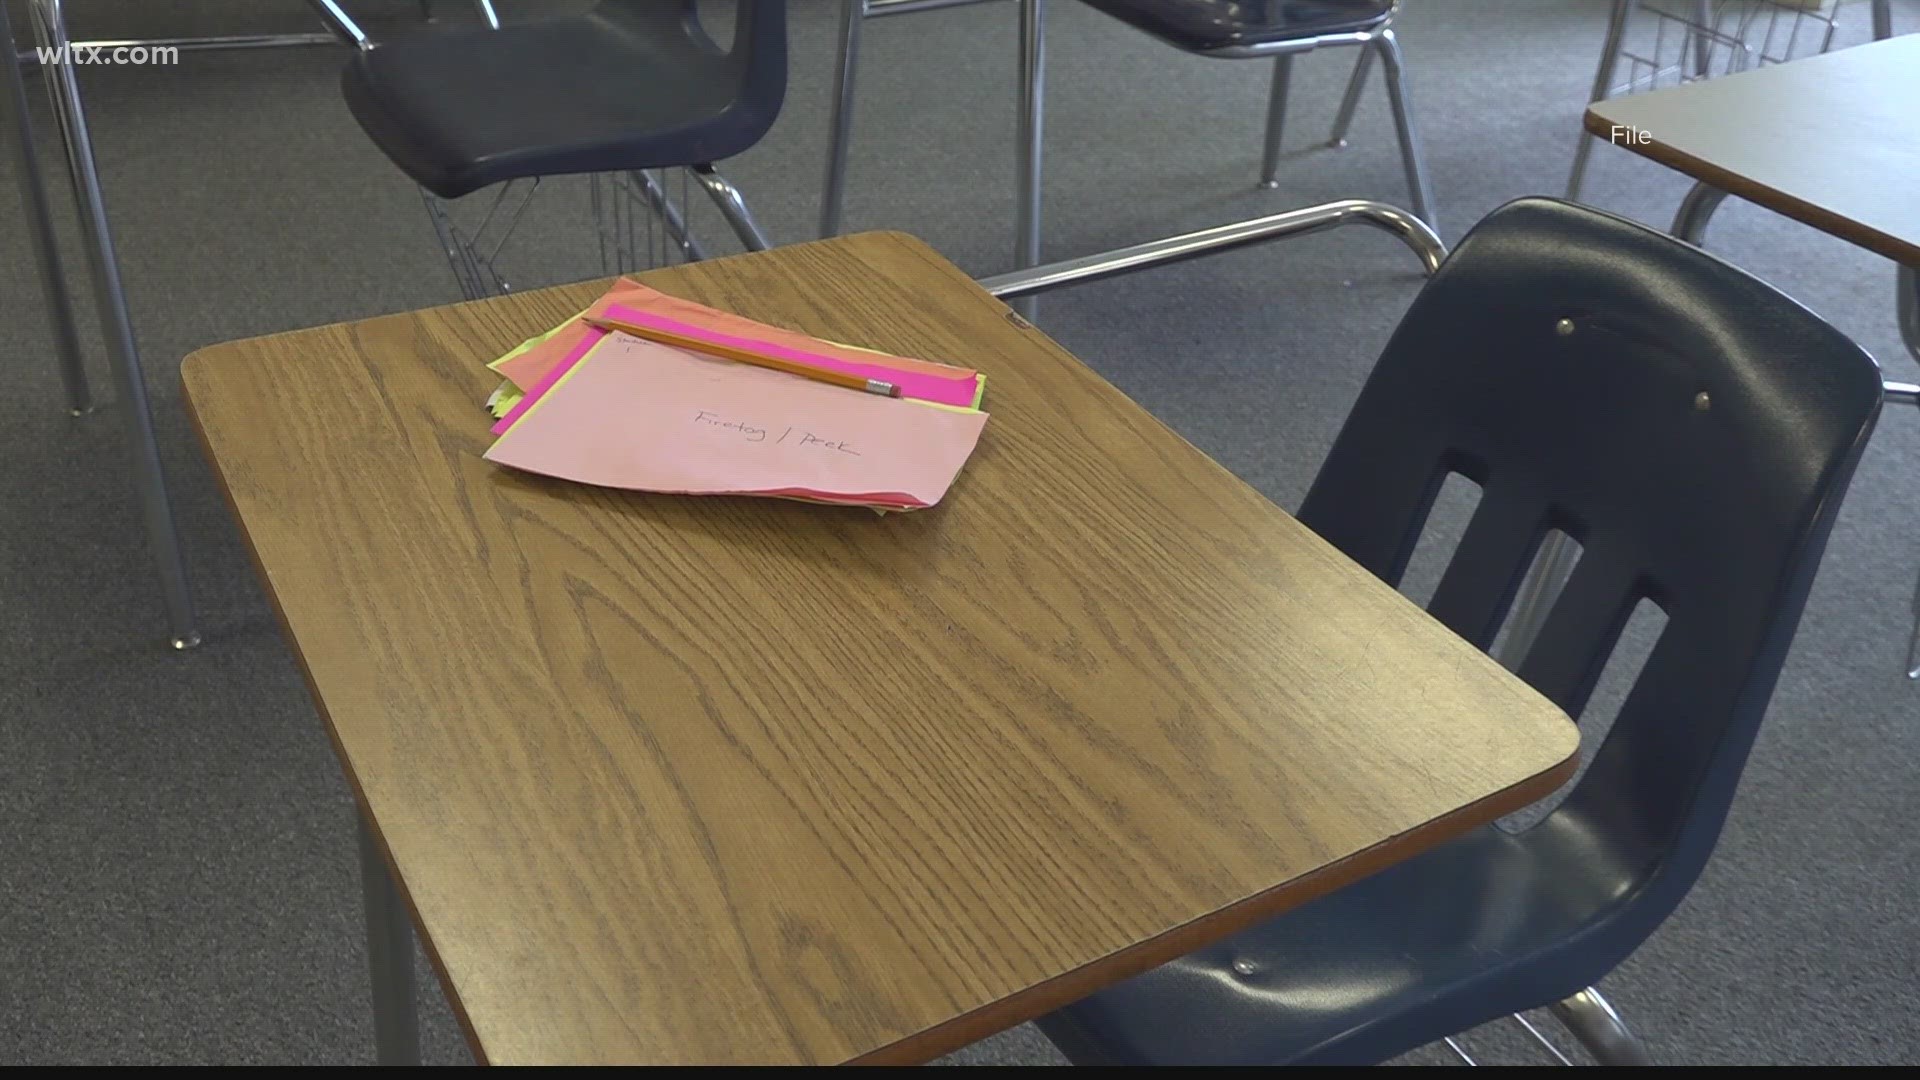 Lawmakers are discussing a proposal that would allow all K-12 grade students to qualify for private school vouchers.